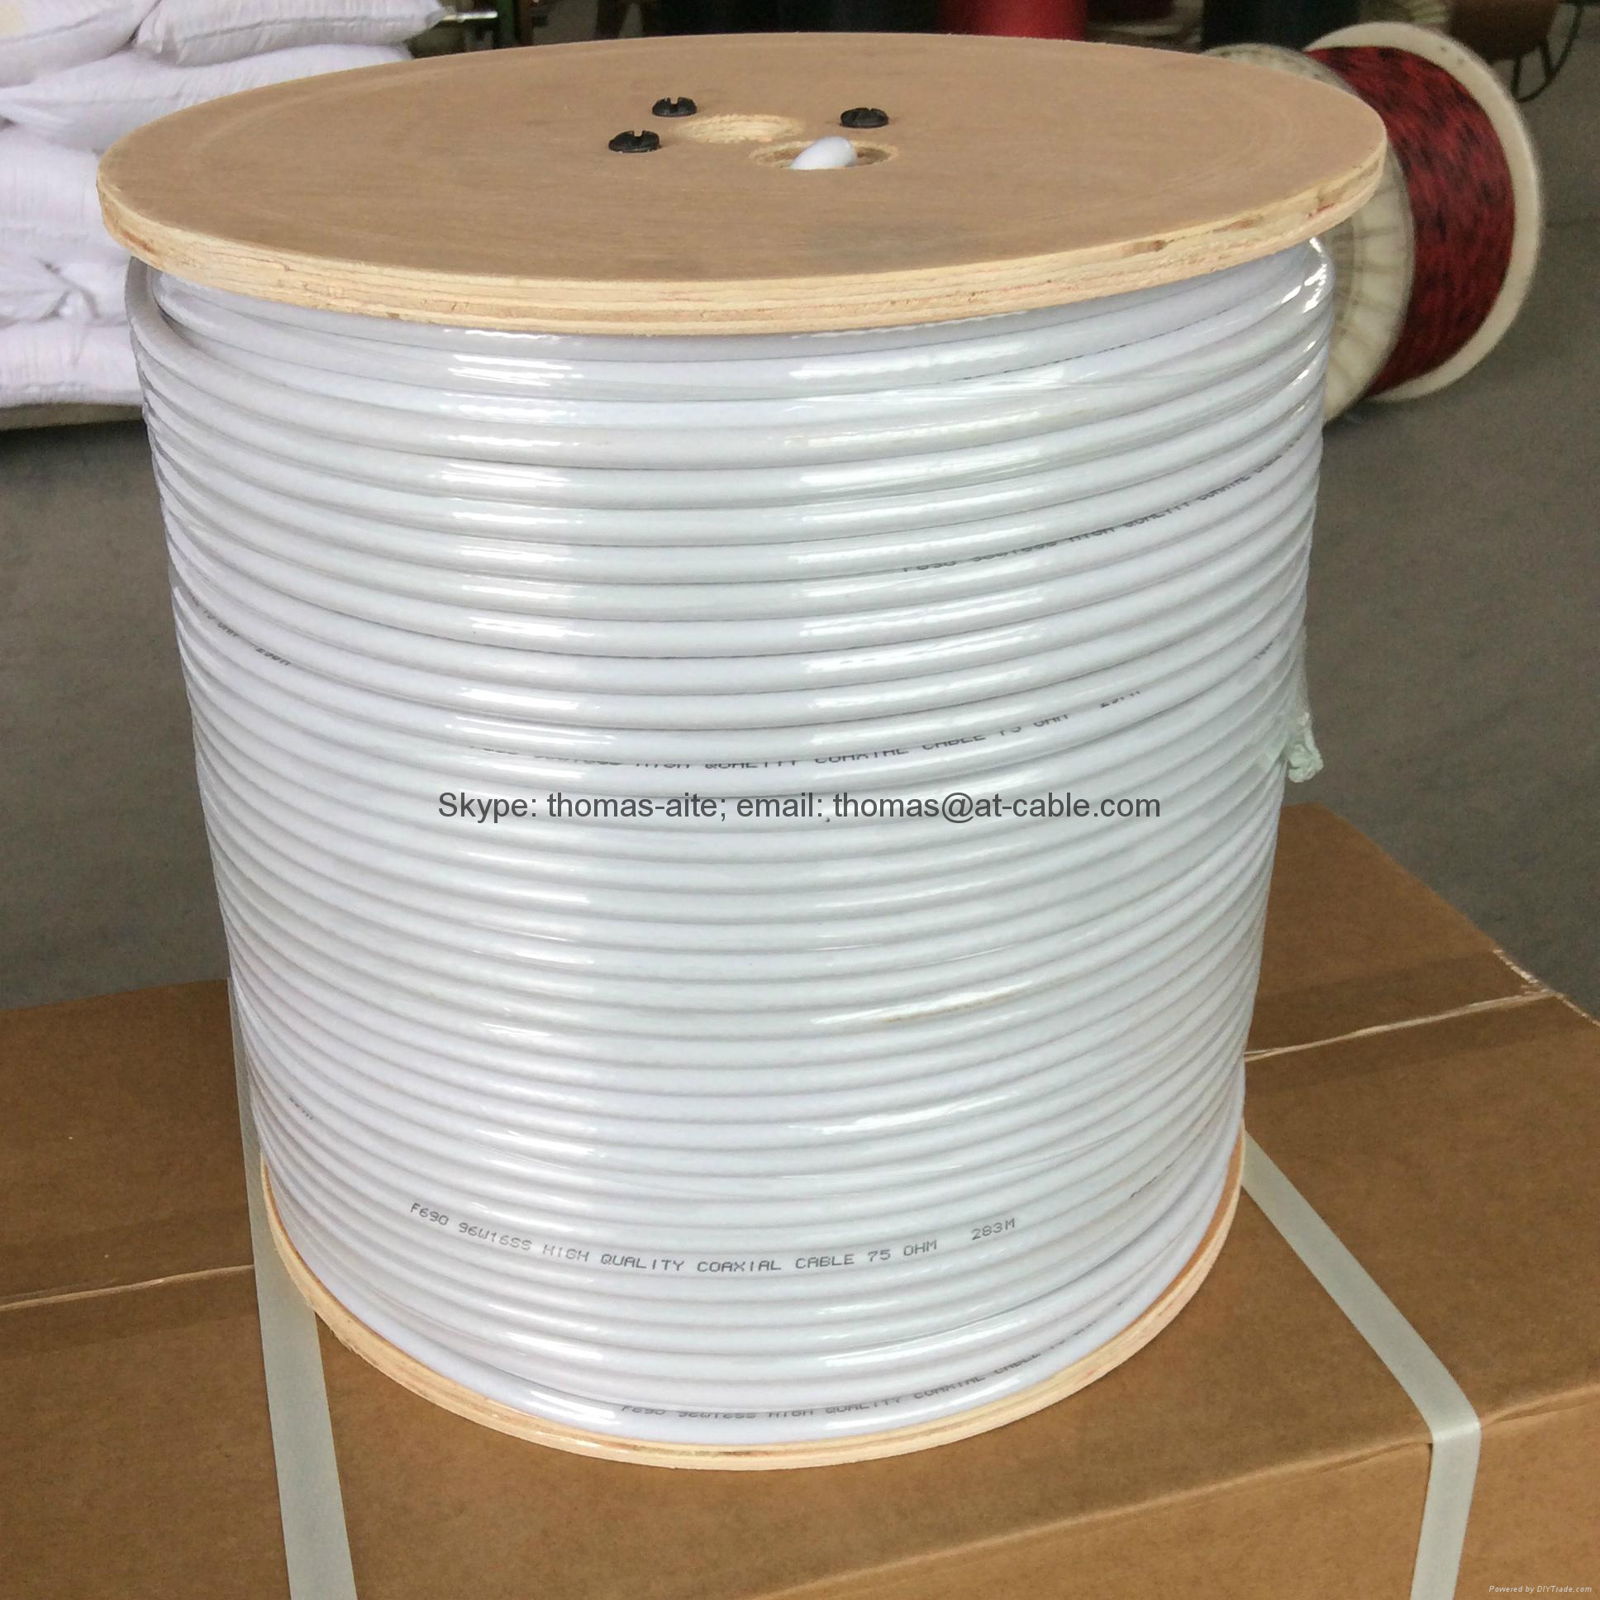 F690 75 OHM 96W 16SS HIGH QUALITY COAXIAL CABLE